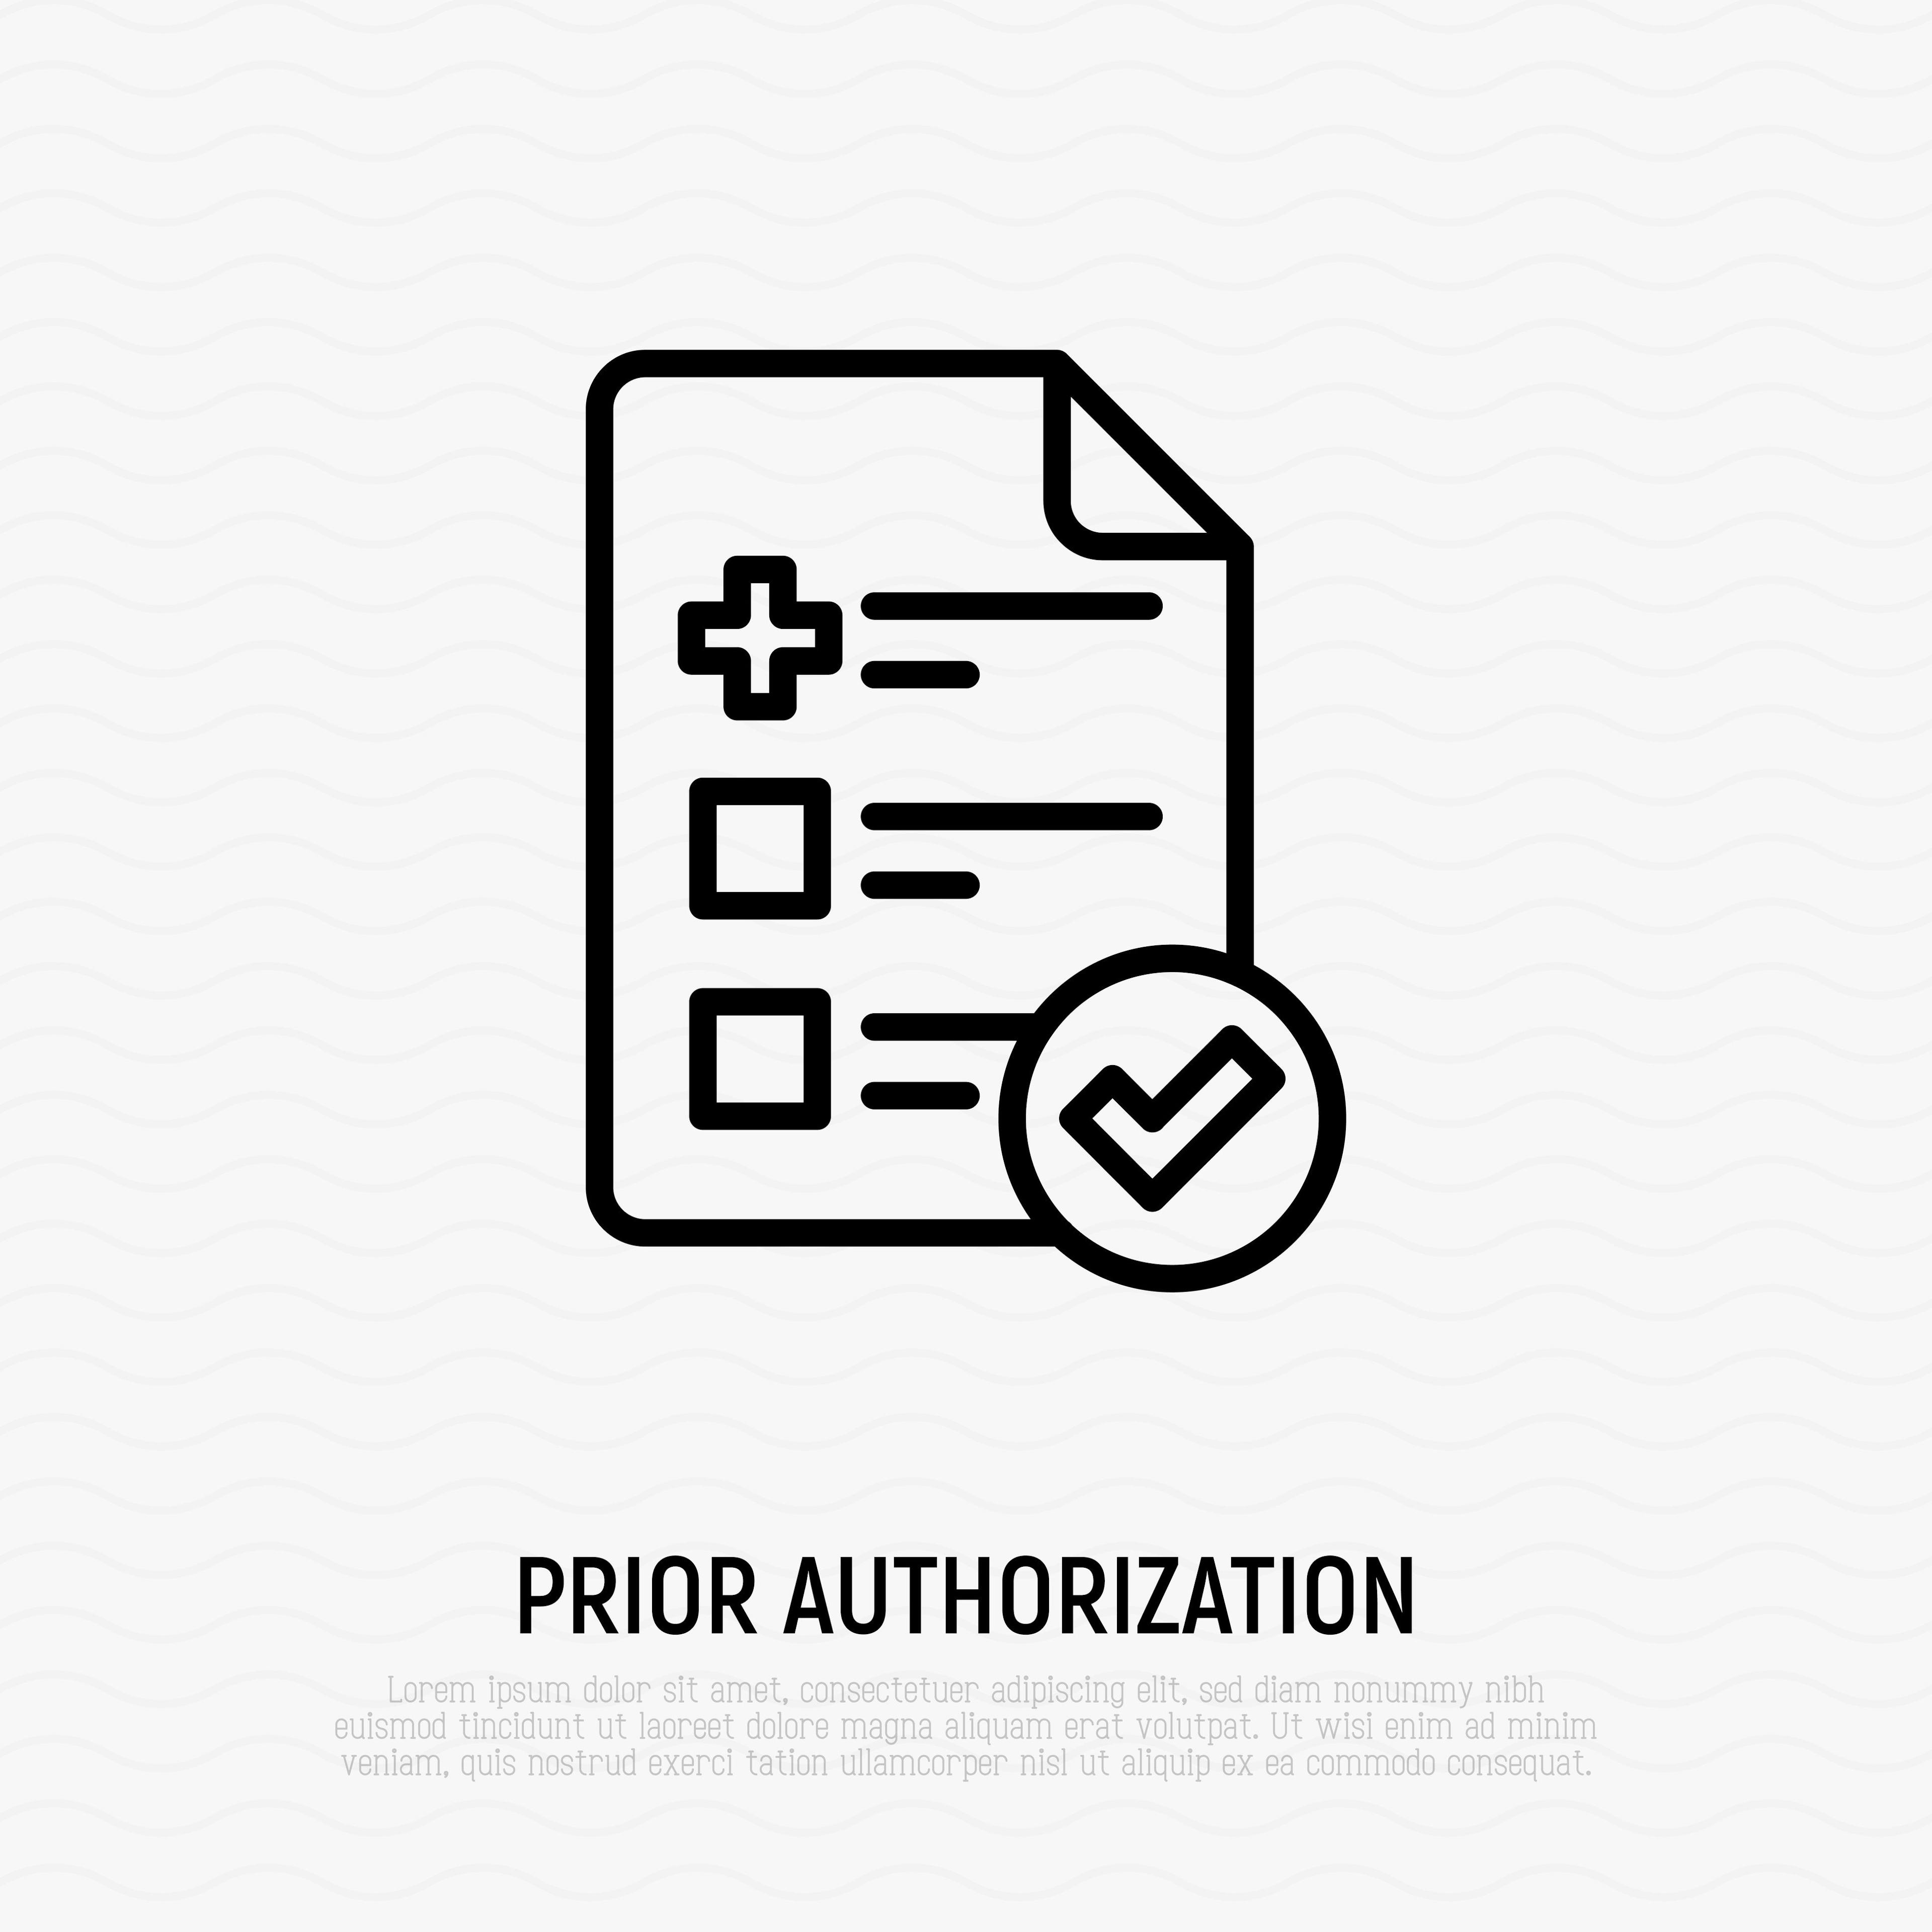 Image of sheet with checkboxes and 'prior authorization' text ©AlexBlogoodf-stock.adobe.com